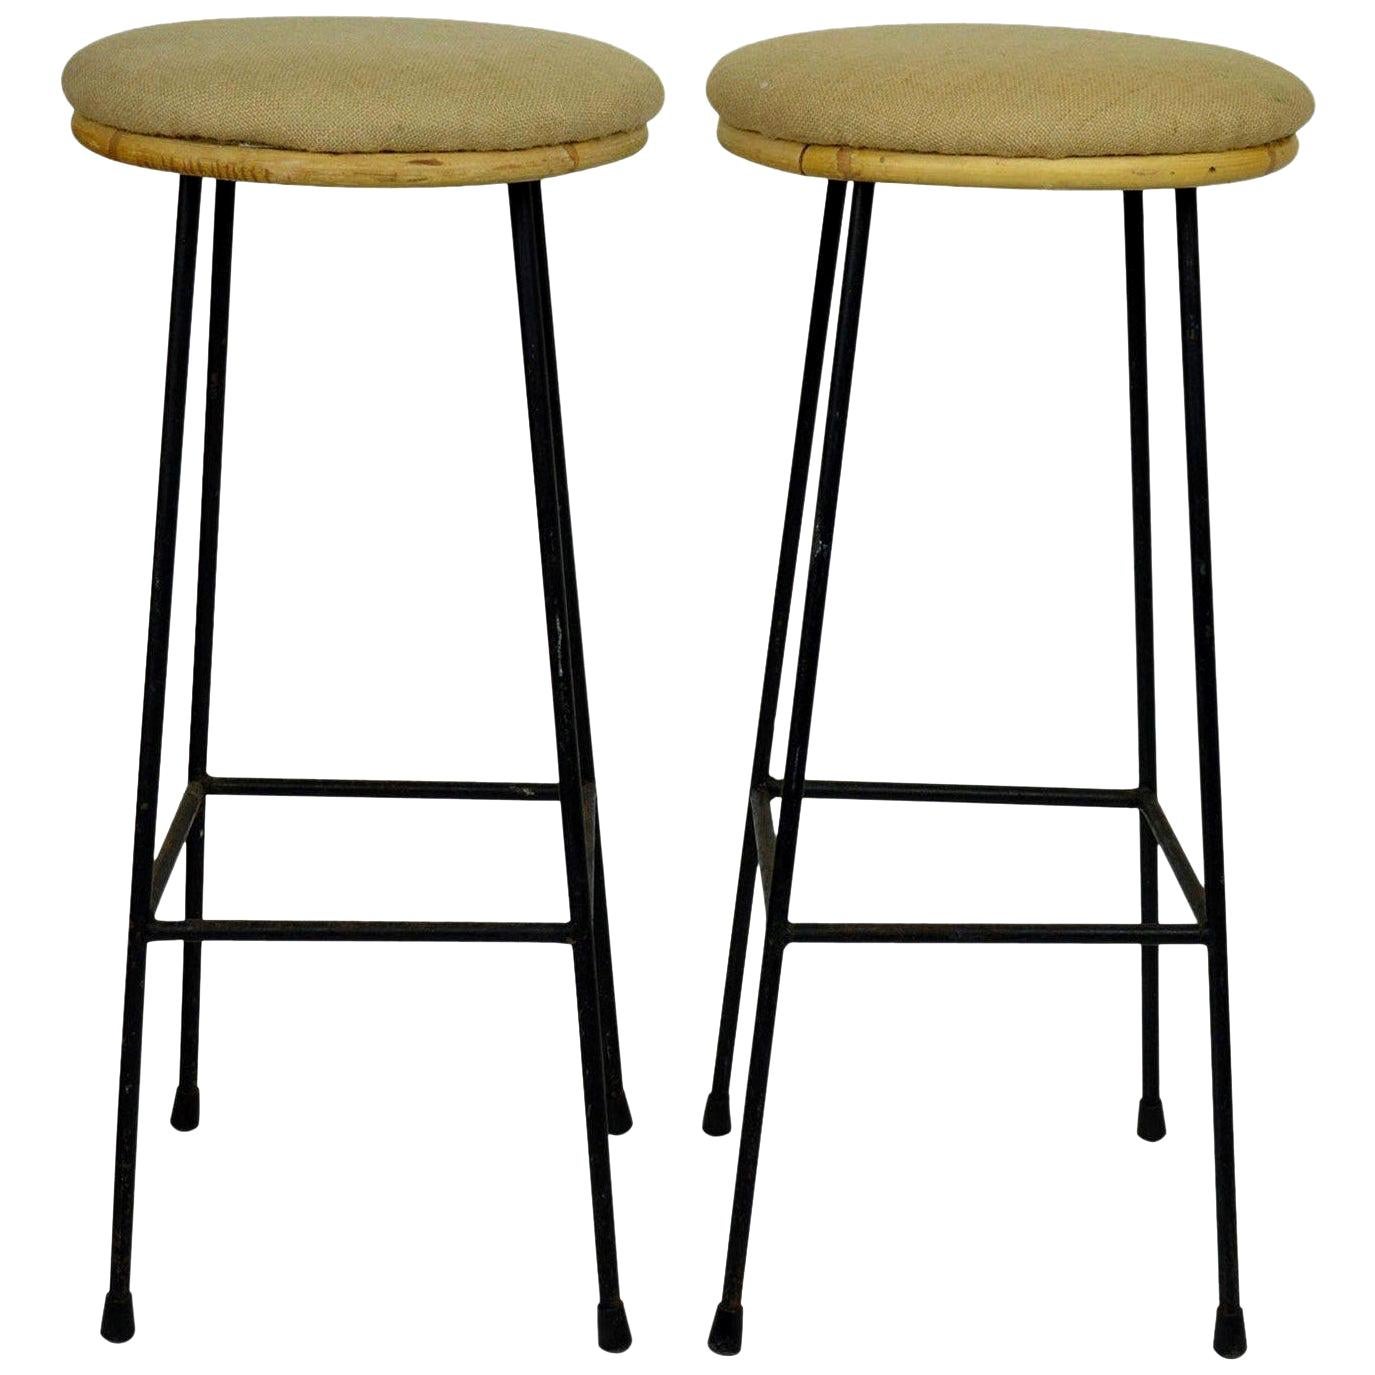 Pair of Midcentury Metal and Bamboo Bar Stools, 1950s